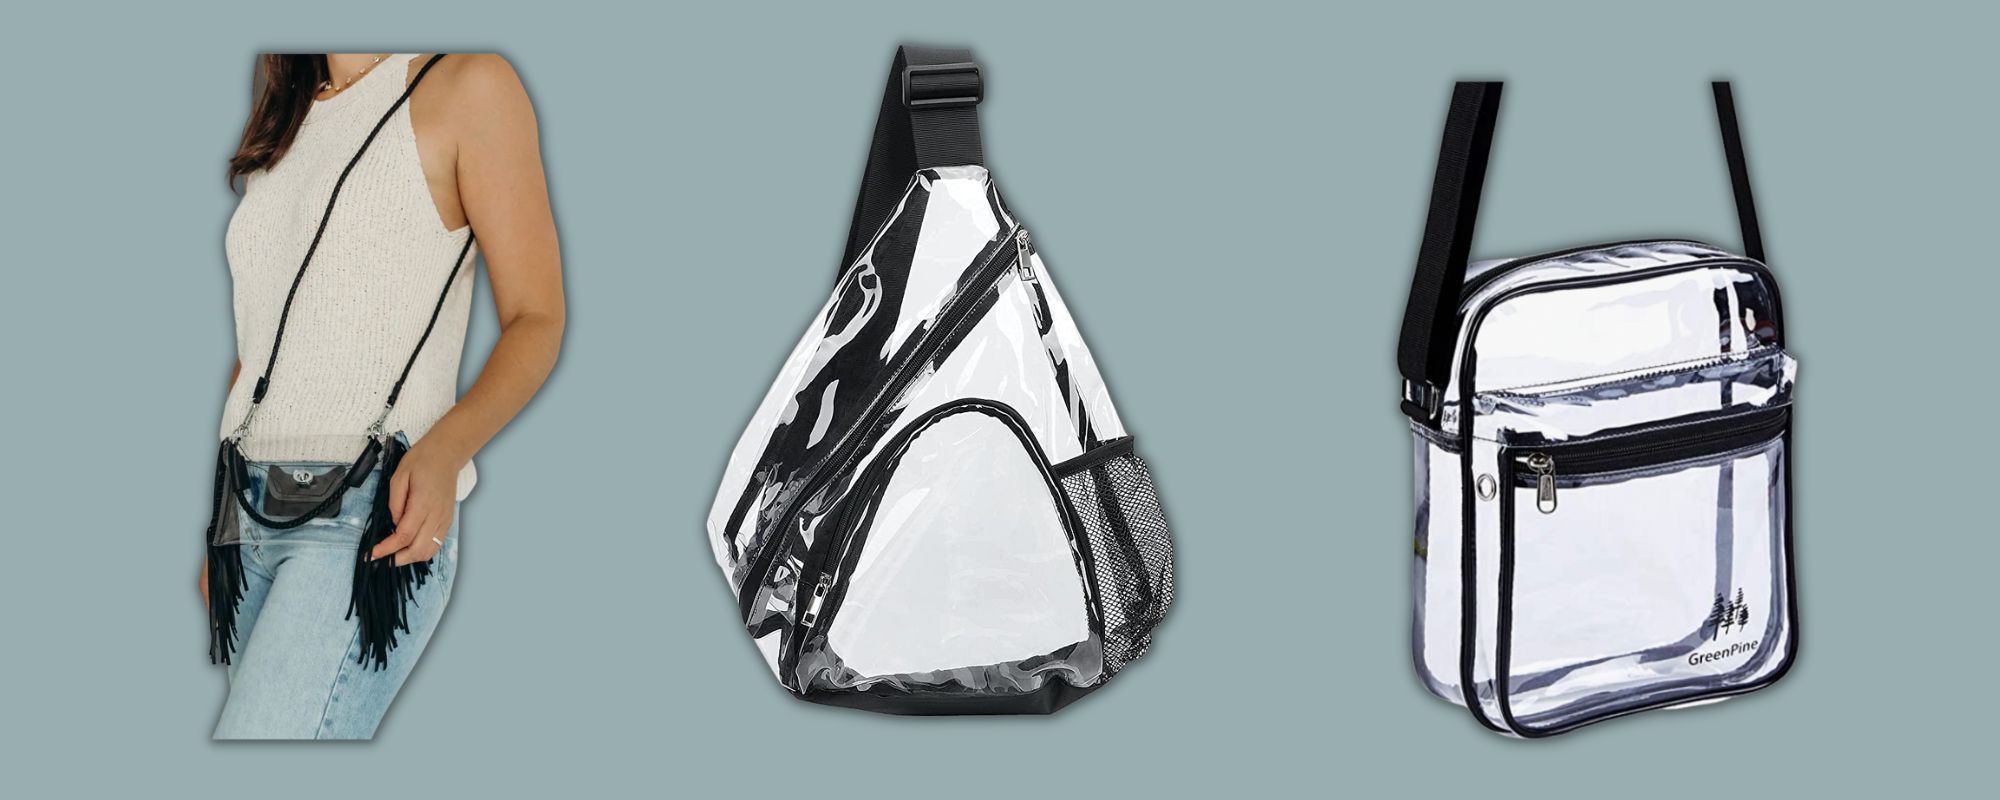 The Trend: Clear Bags (Not Your Standard) in 2023